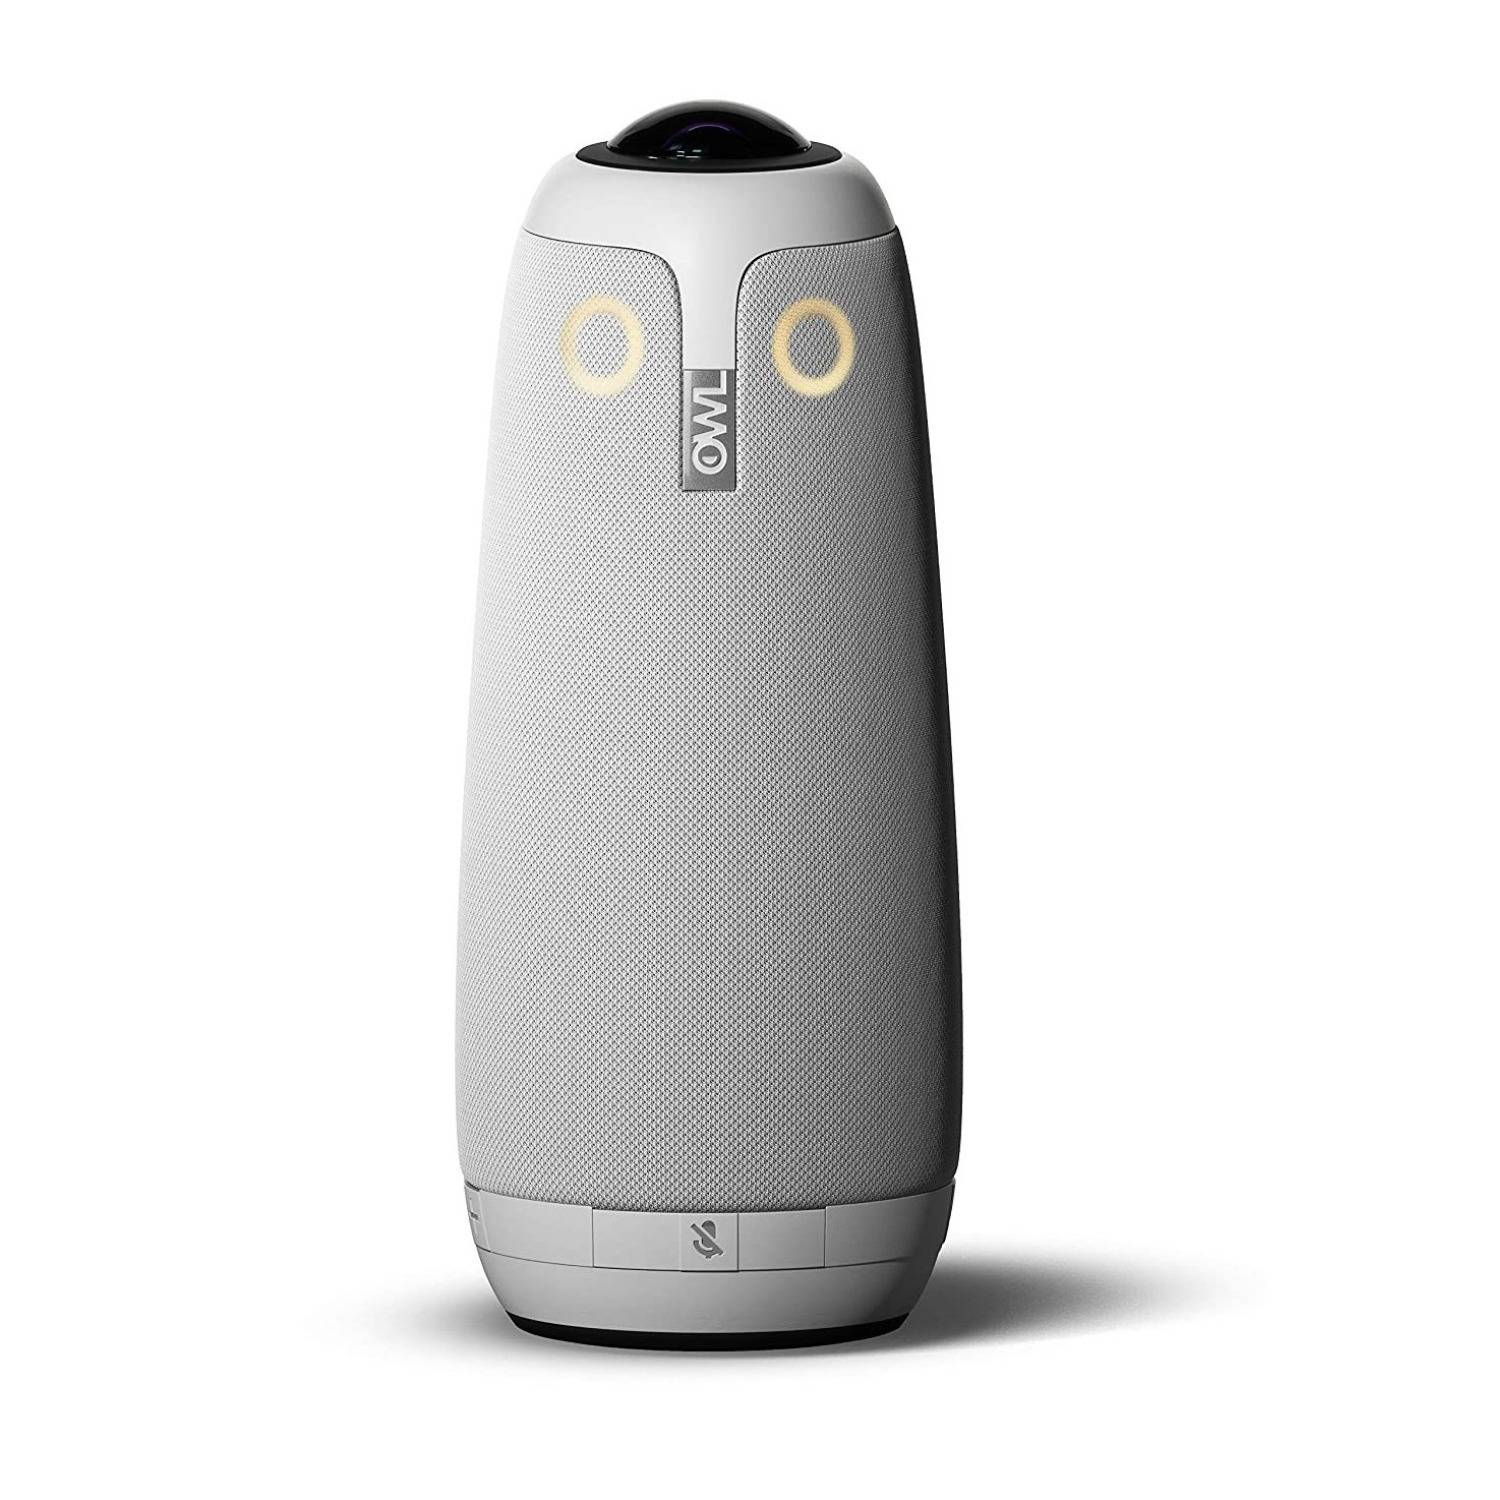 Owl Labs Meeting Owl Pro 360 Degree 1080p Smart Video Conference Camera (White)